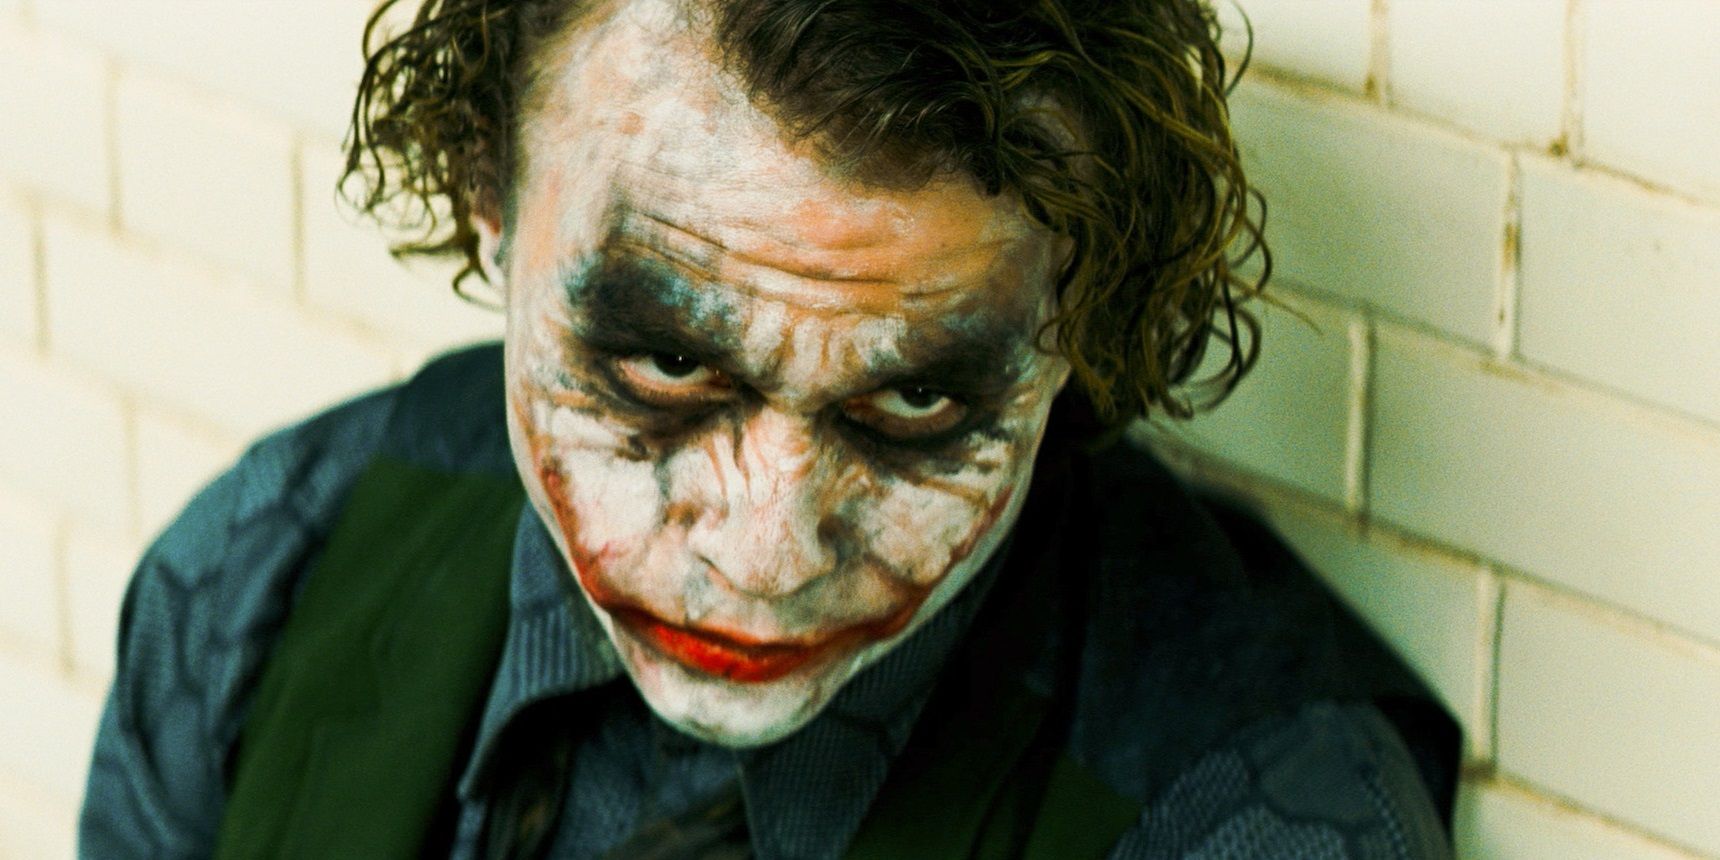 The Joker in a police station in The Dark Knight